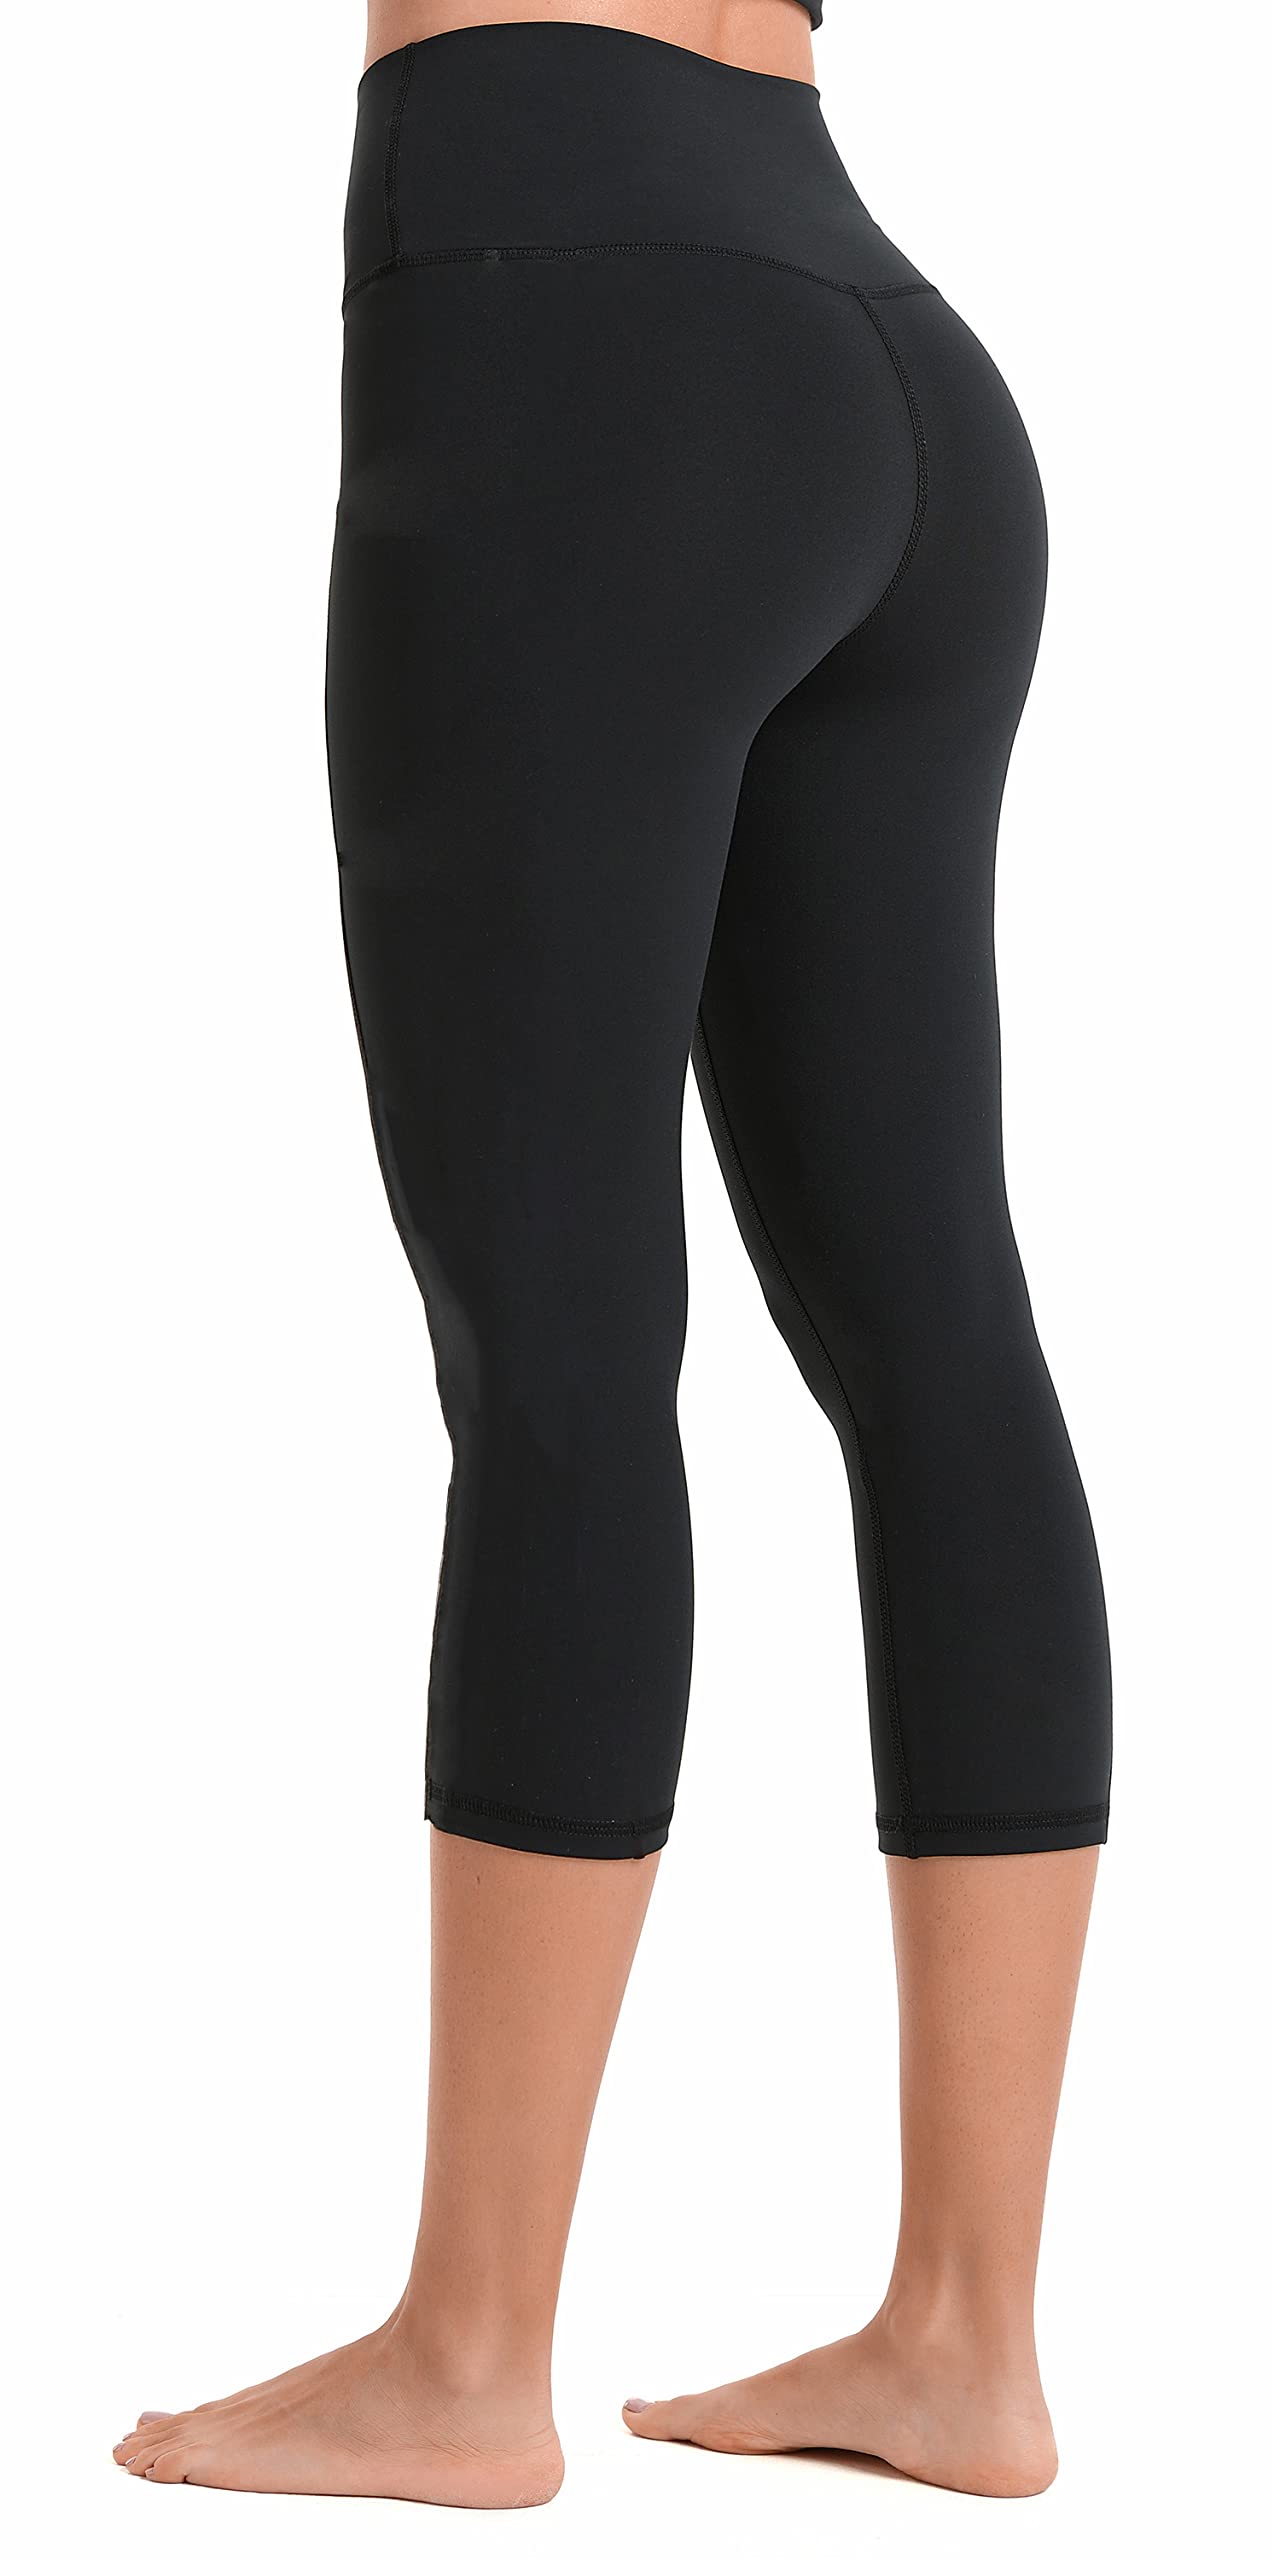 Sunzel Workout Leggings for Women, Squat Proof High Waisted Yoga Pants 4  Way Stretch, Buttery Soft 19 Black X-Small